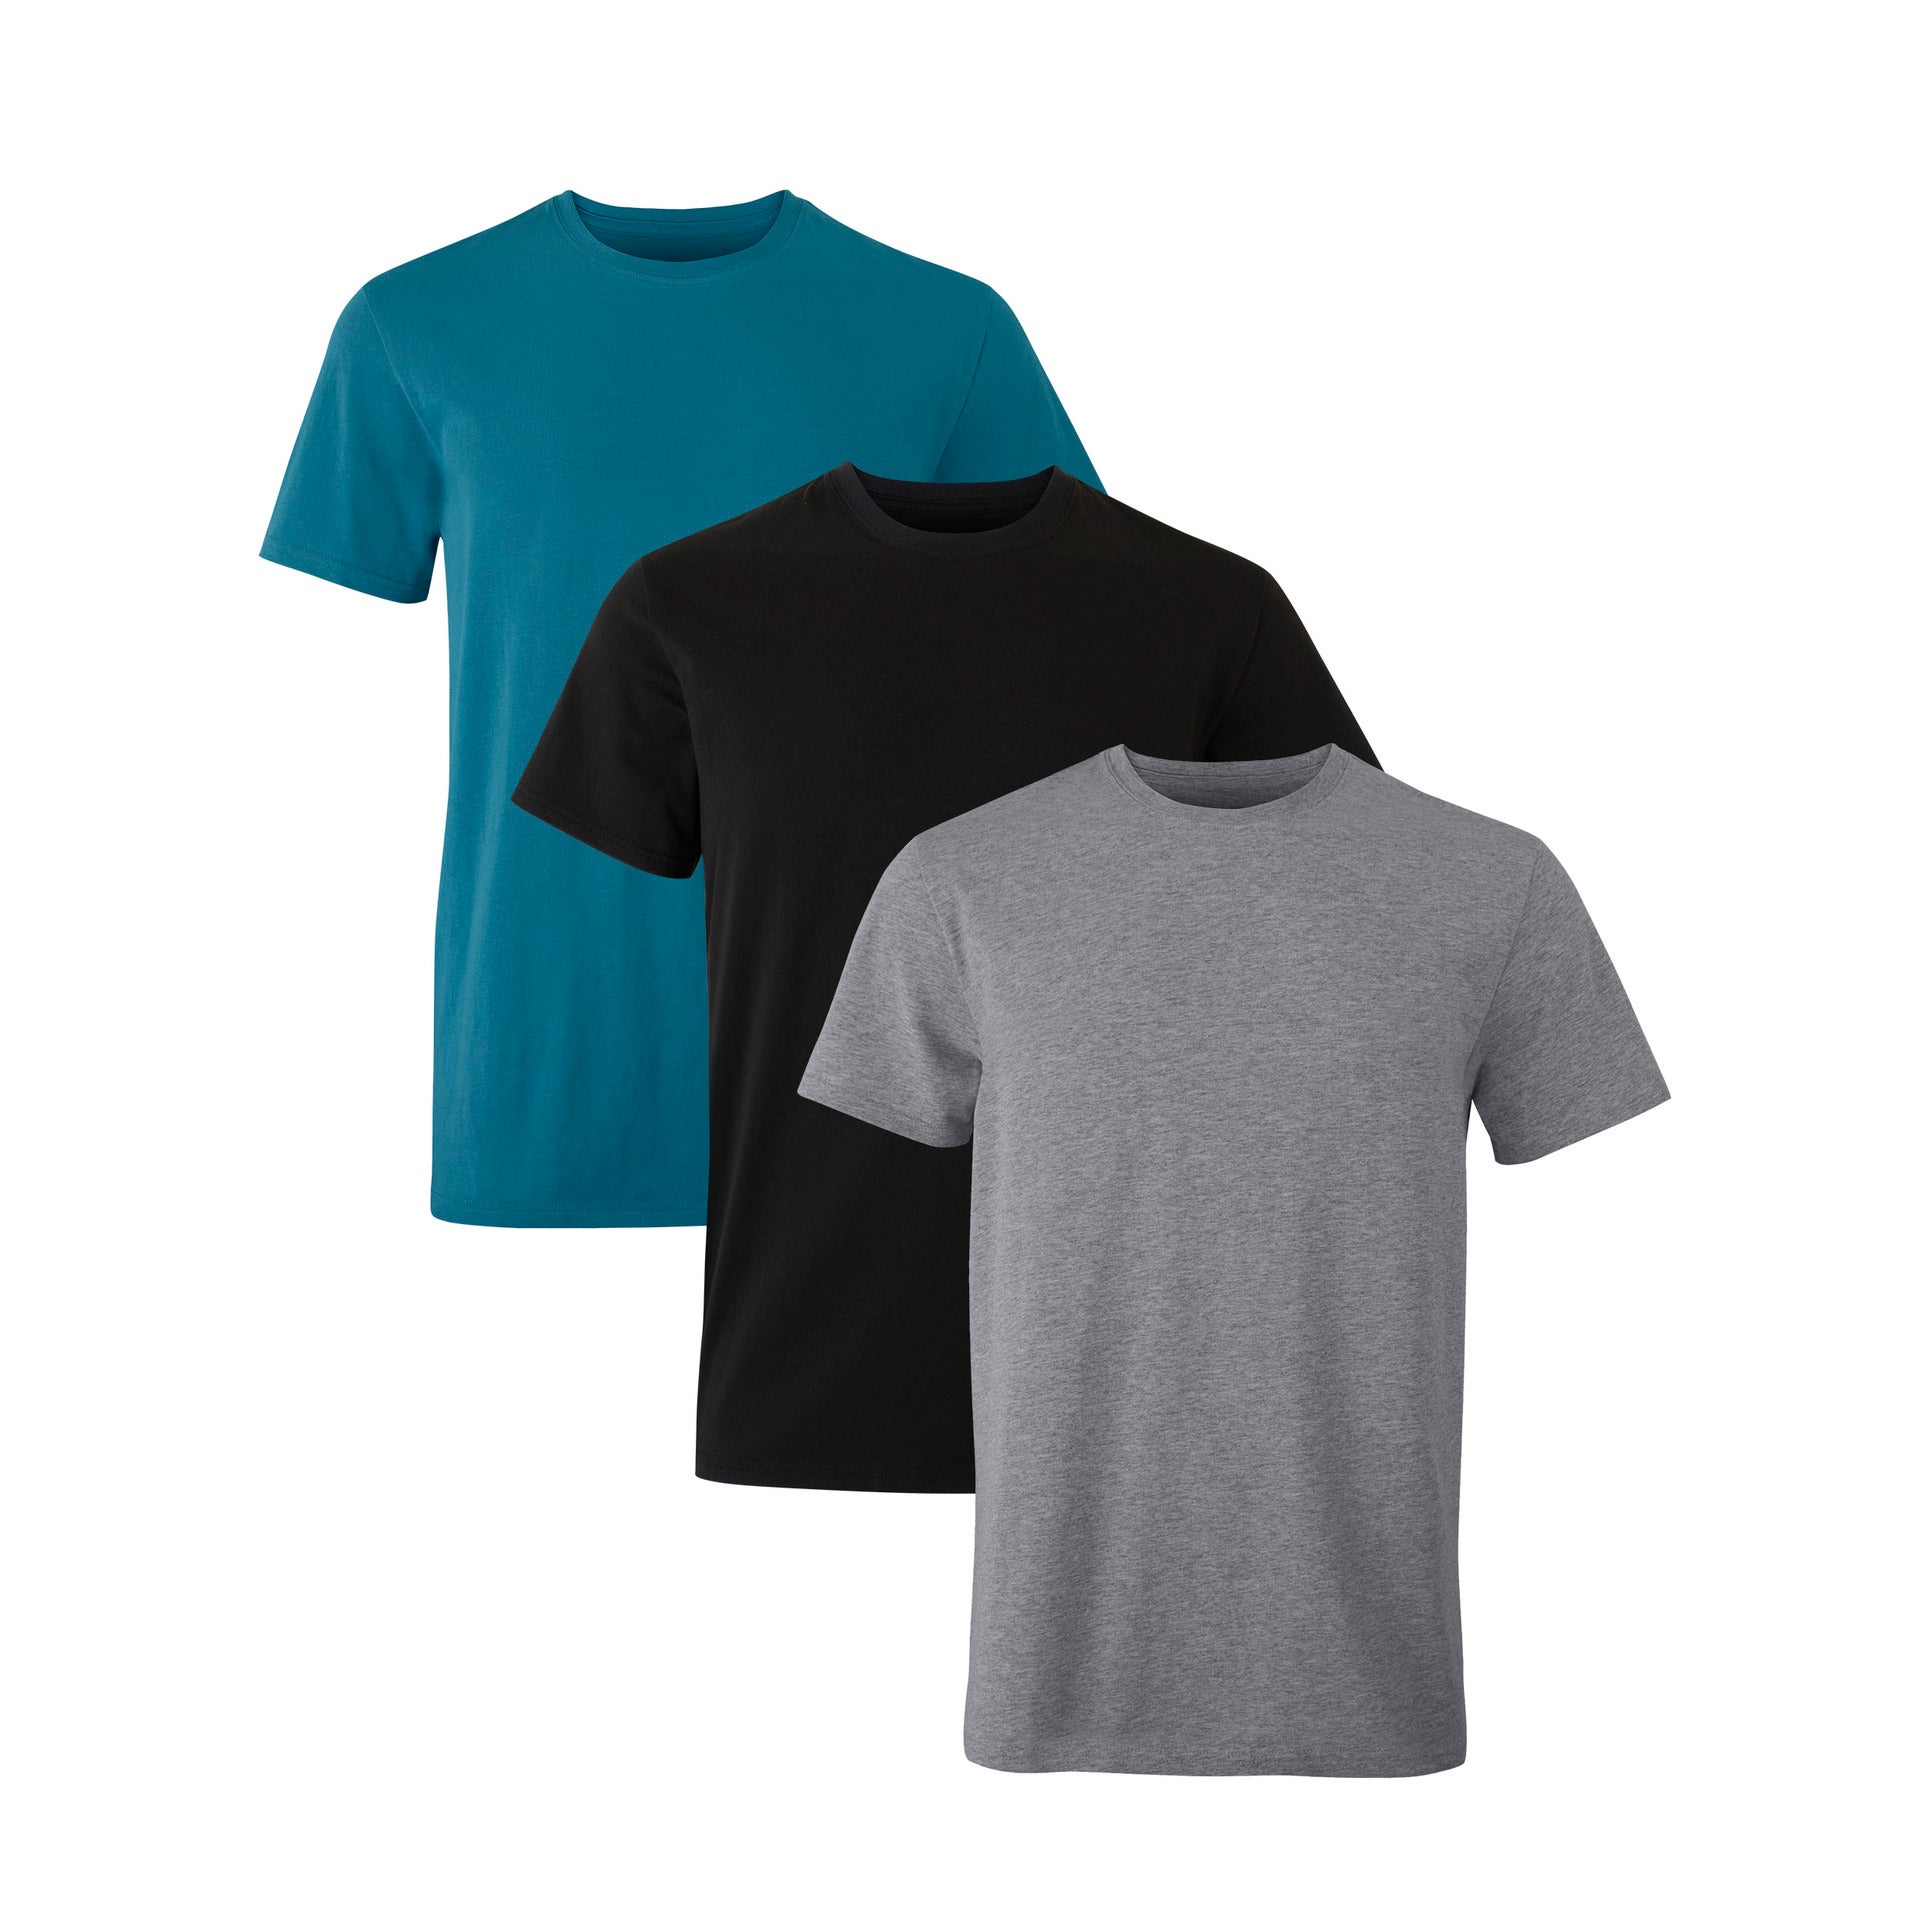 3-pack of moisture-wicking shirts